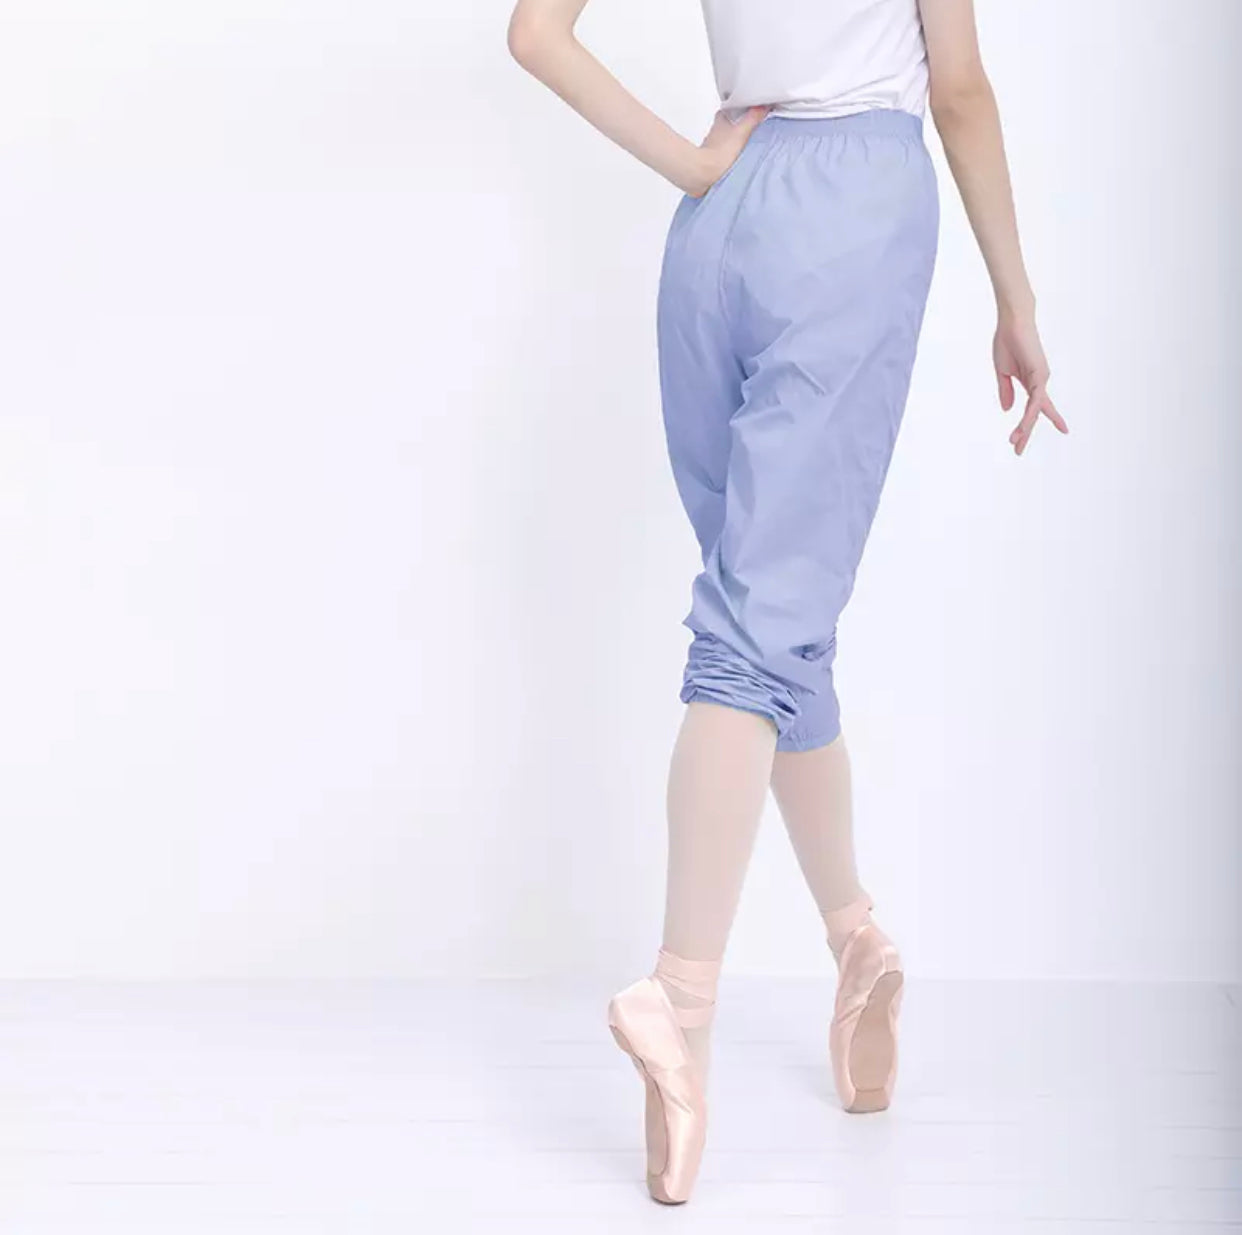 Trash Bag Pants, sauna pants, ripstop pants warrmup pants for ballet and dance in sky blue from The Collective Dancewear